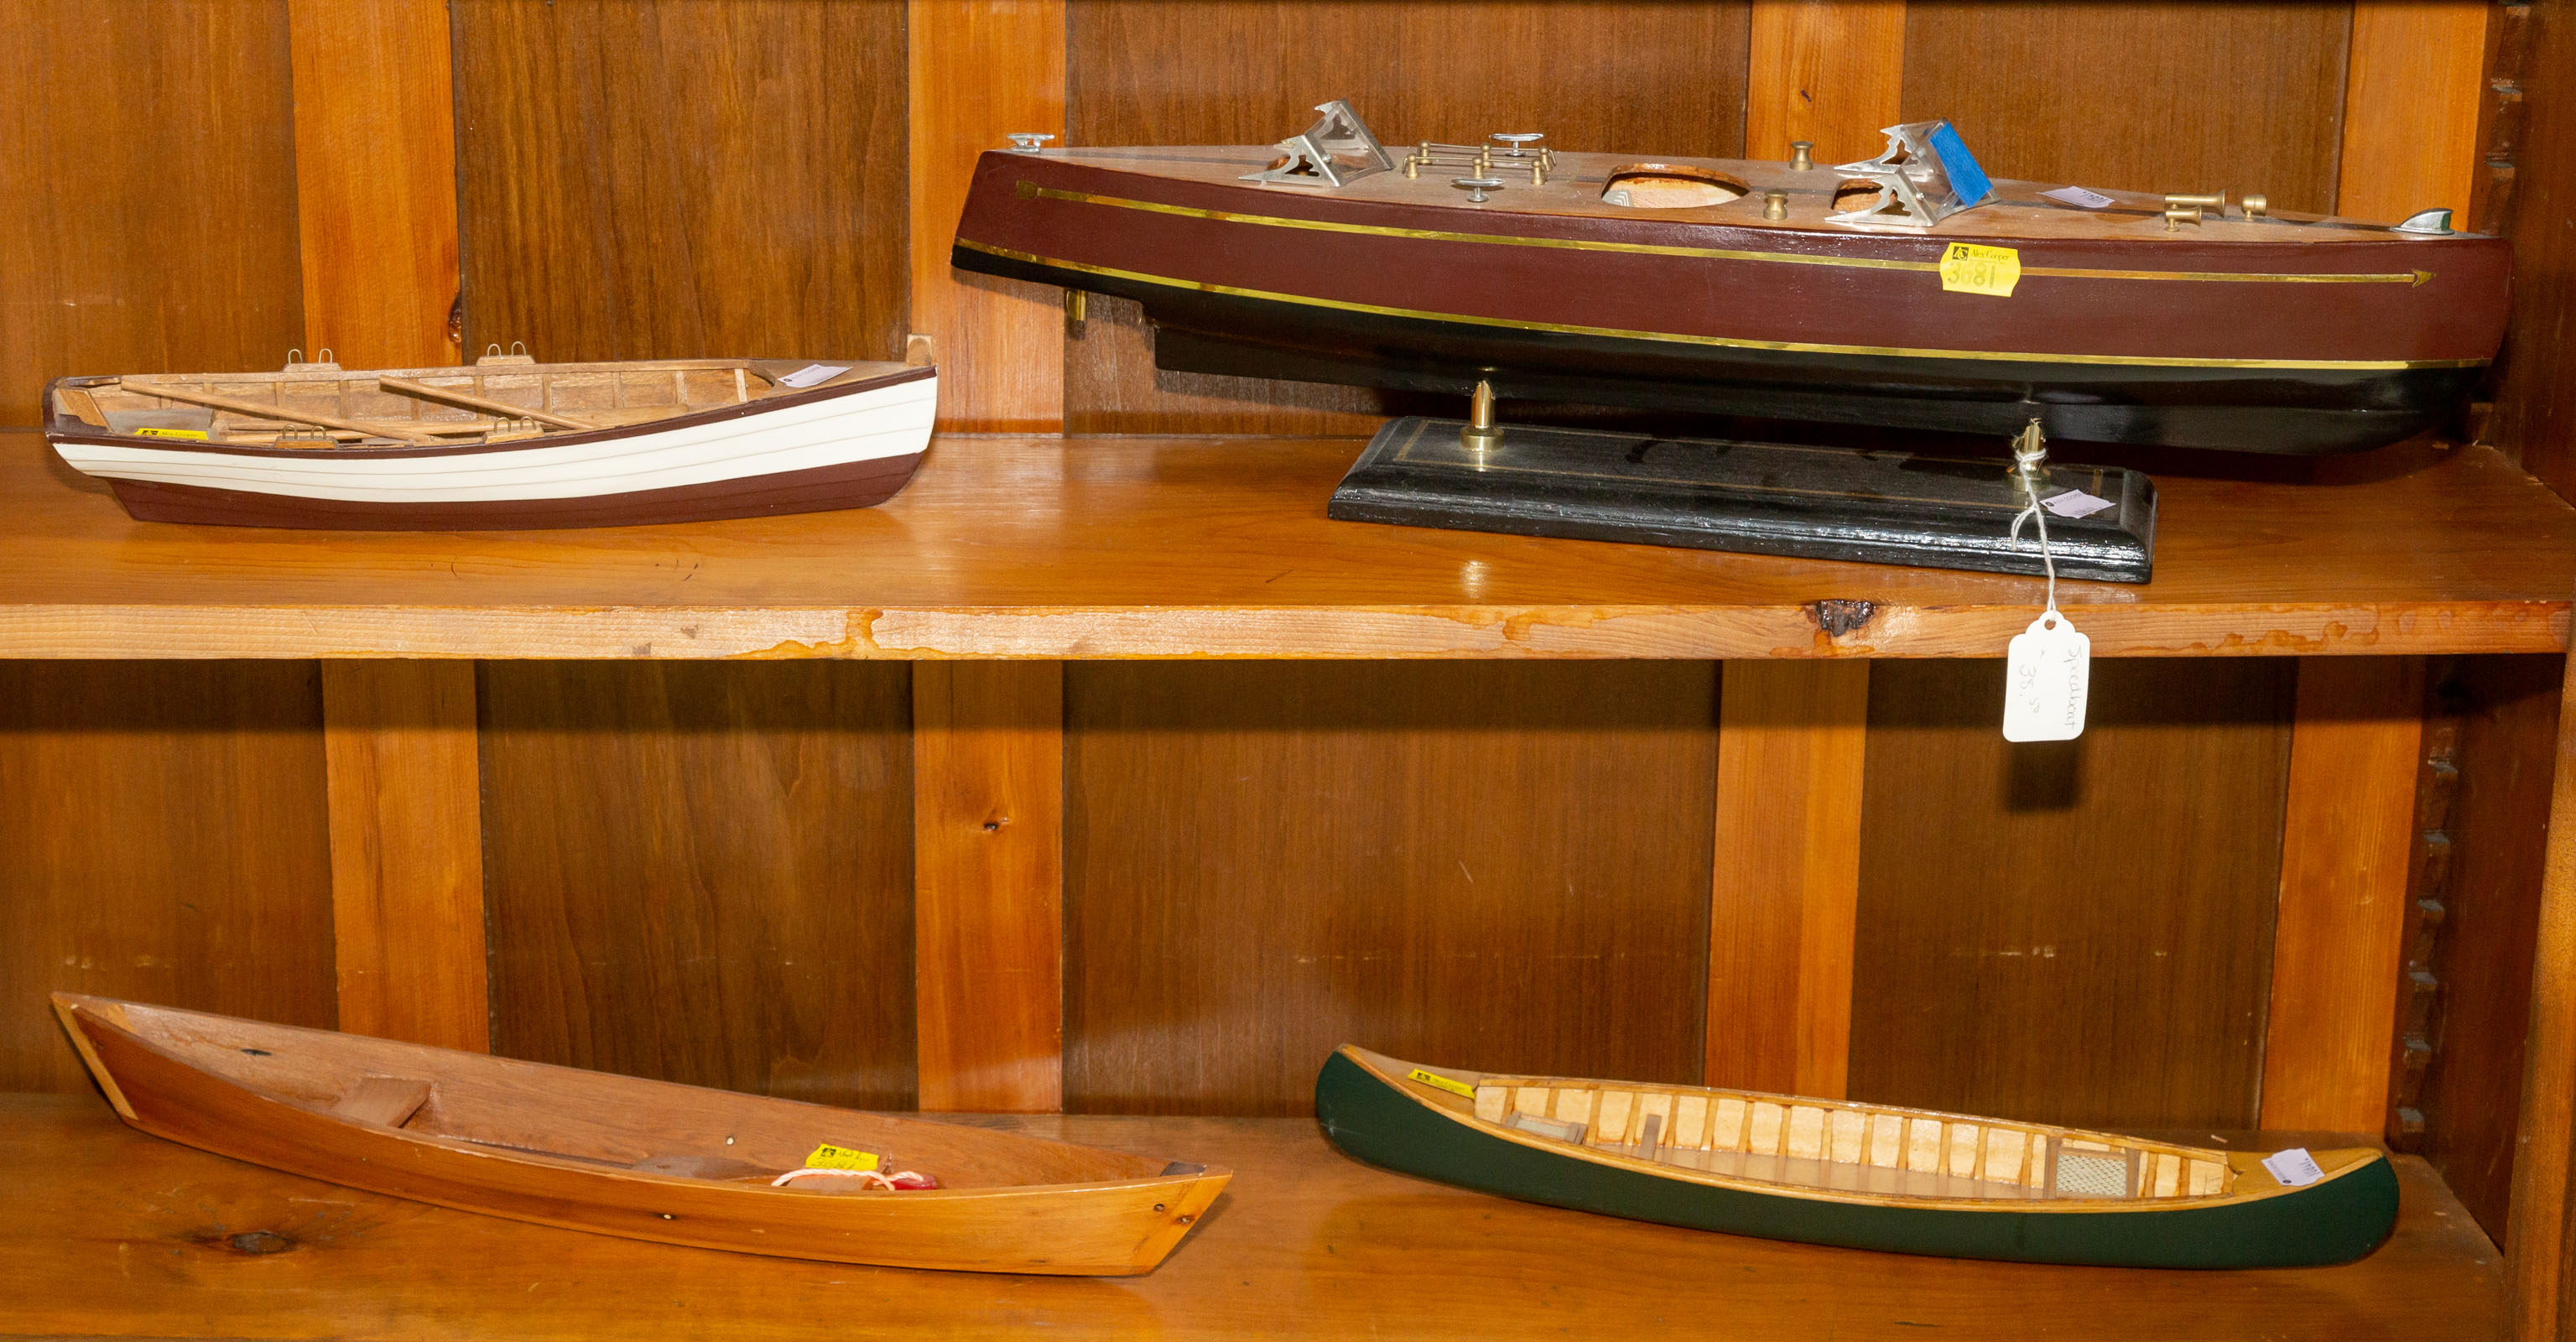 FOUR SCALE MODEL BOATS Hand-crafted,